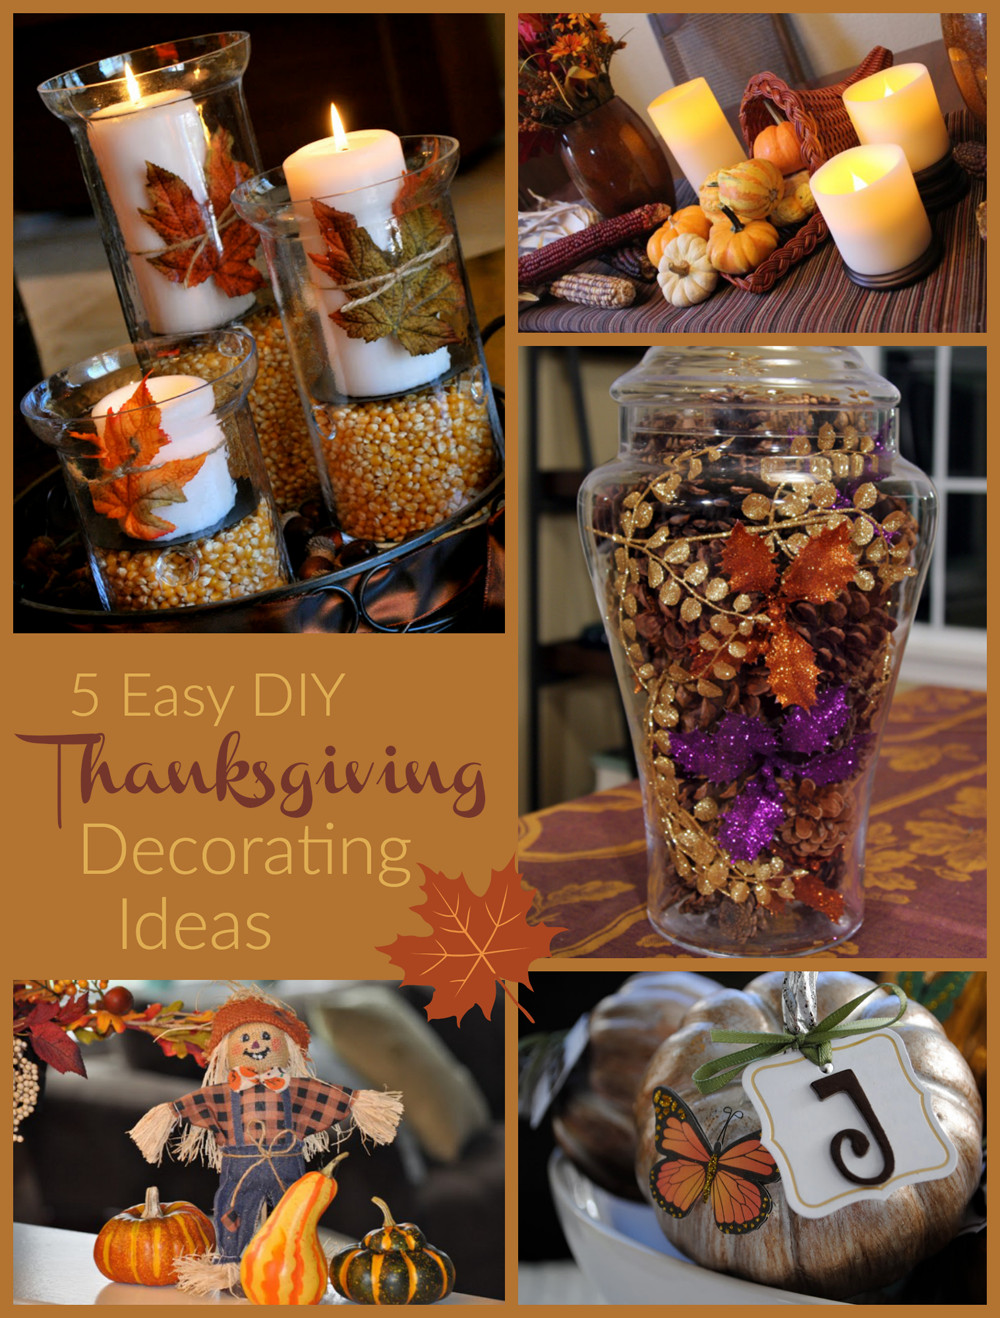 Ideas For Thanksgiving Decorating
 Easy Thanksgiving Decorating Ideas